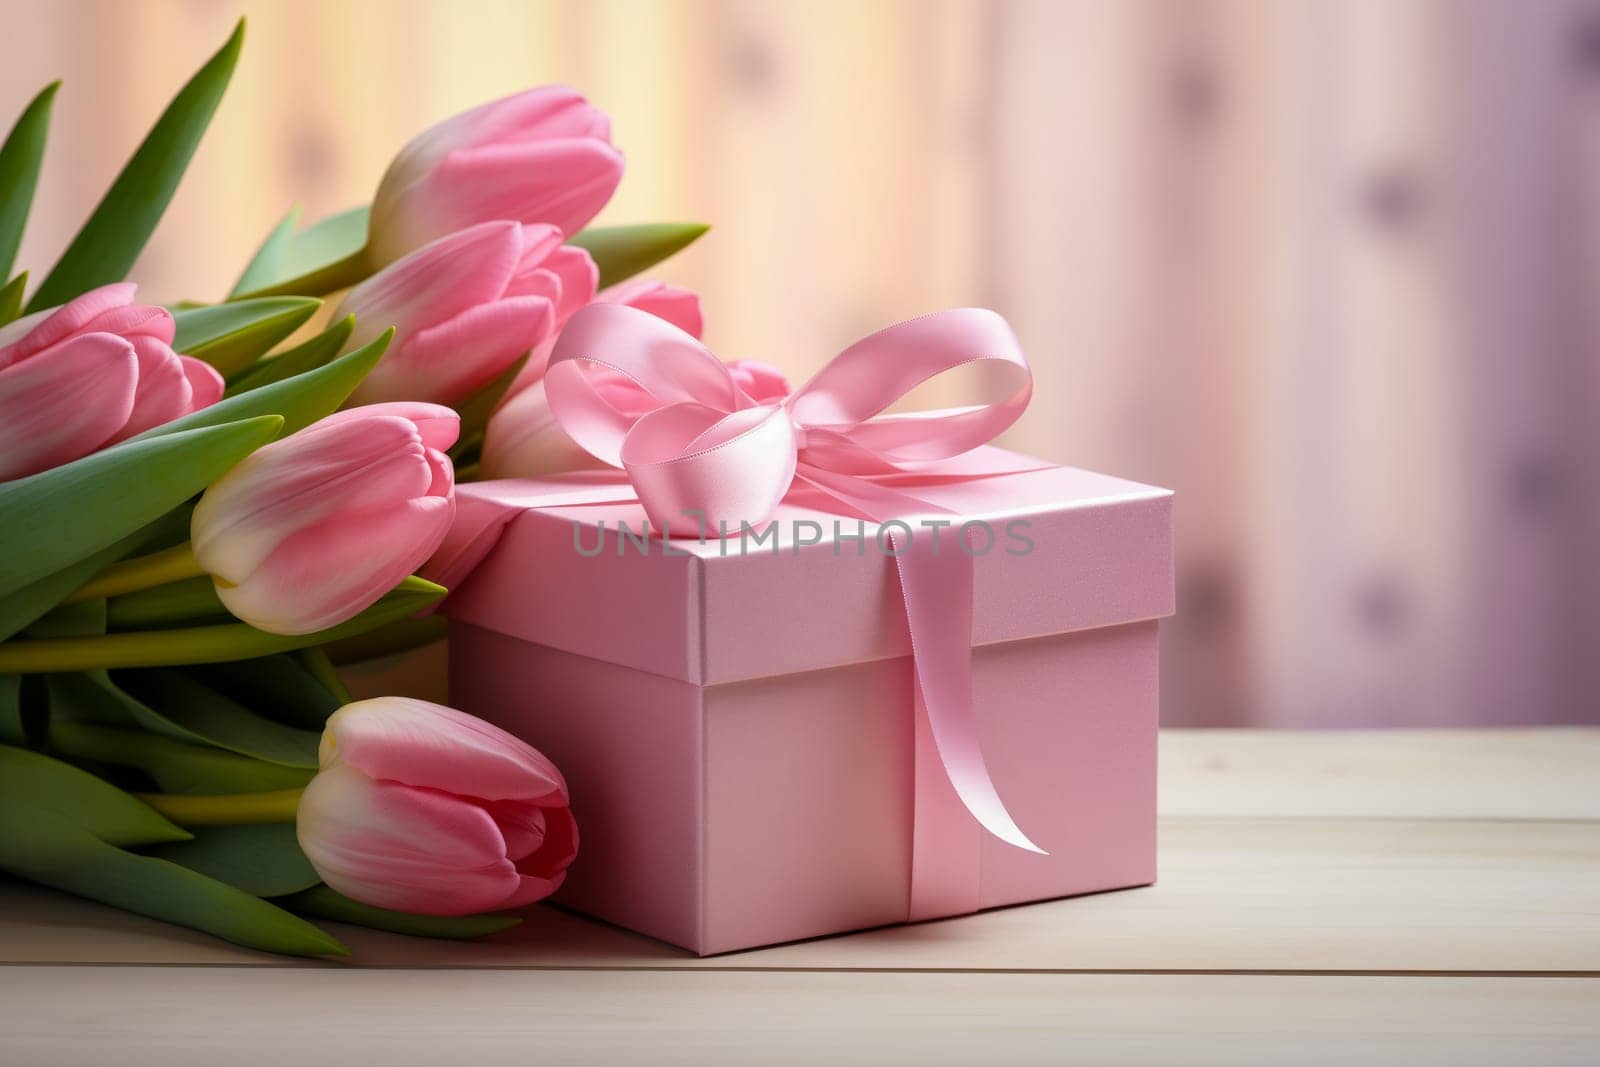 Gift Box with Pink Ribbon Beside bouquet of Fresh Tulips on Bokeh Background. Good for Valentine day, March 8, mother day, spring holidays, birthday designs